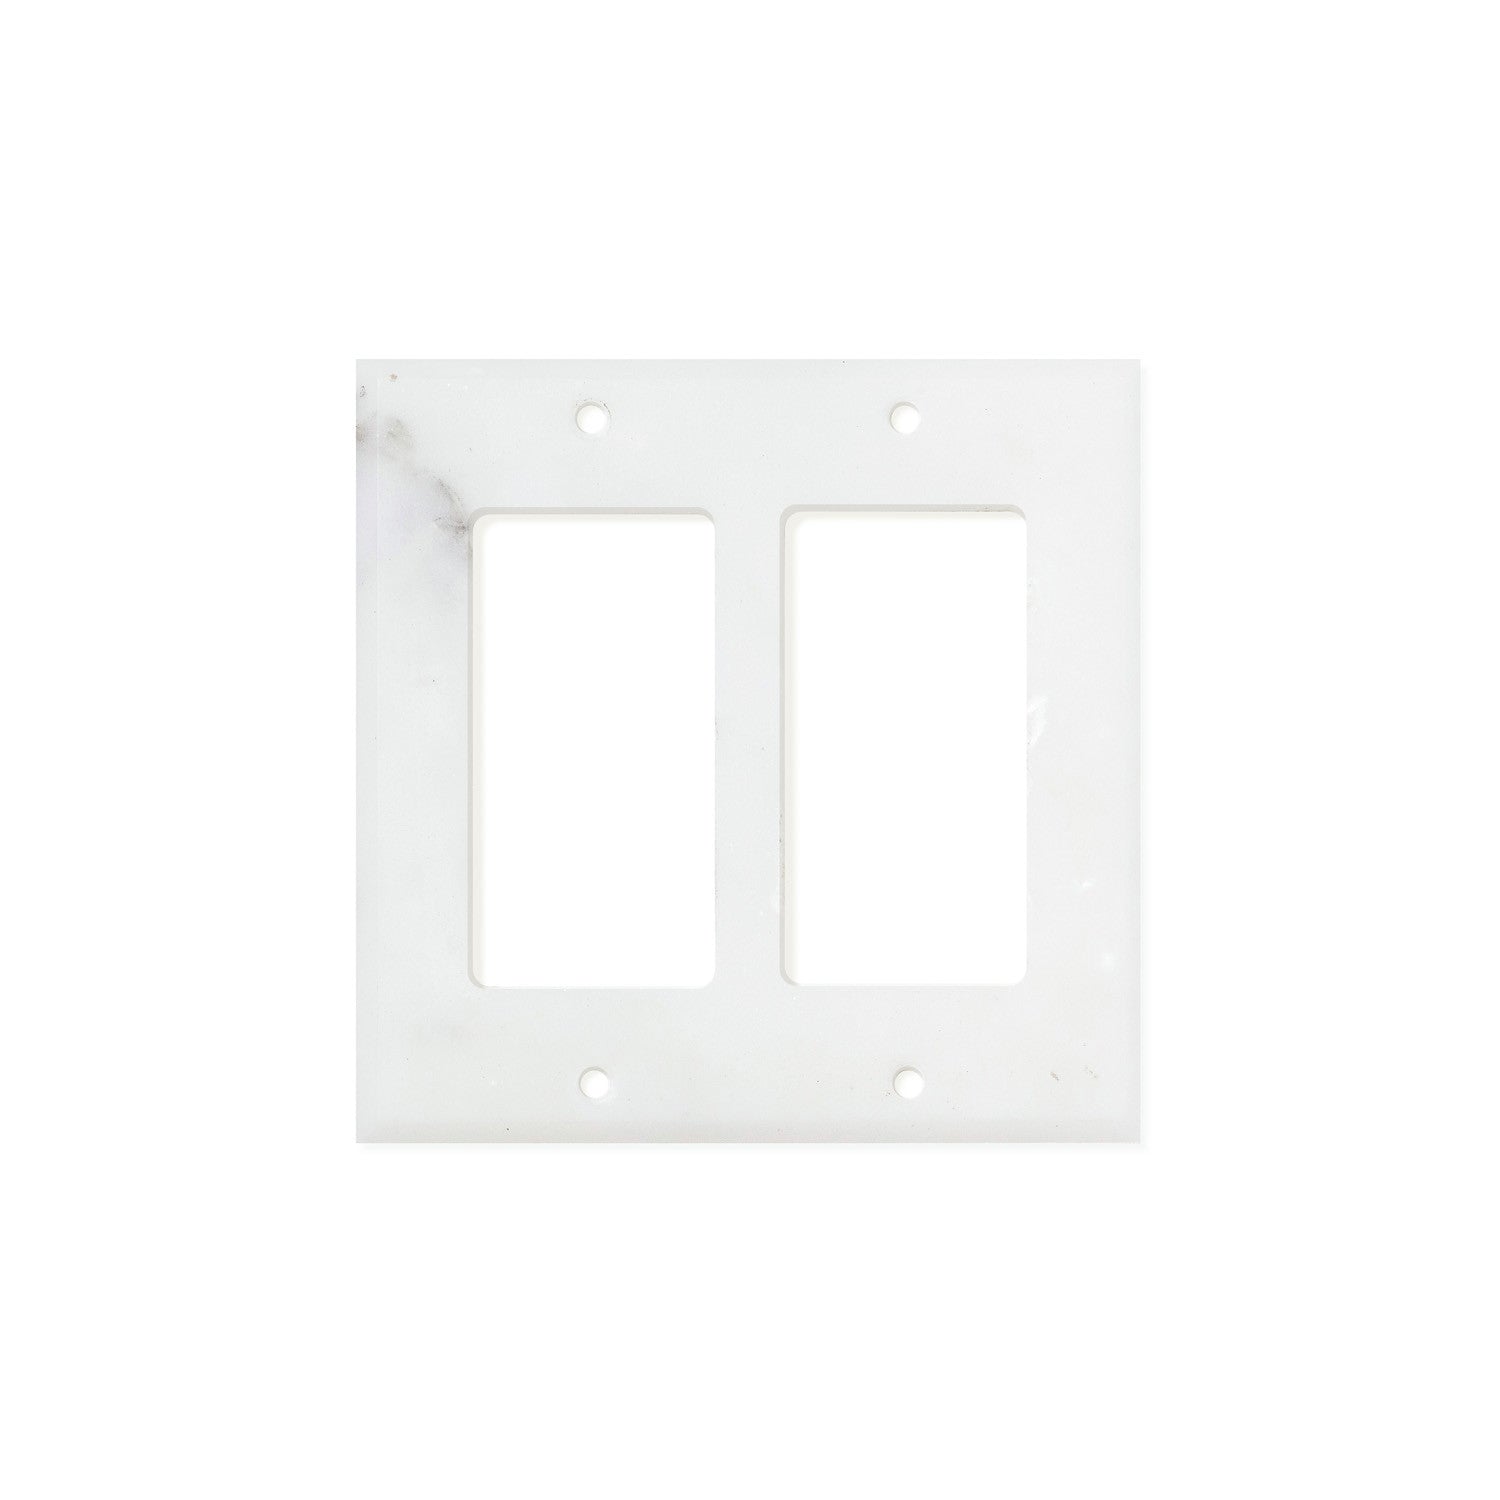 Calacatta Gold Marble Switch Plate Cover, Polished (2 ROCKER) - Tilephile